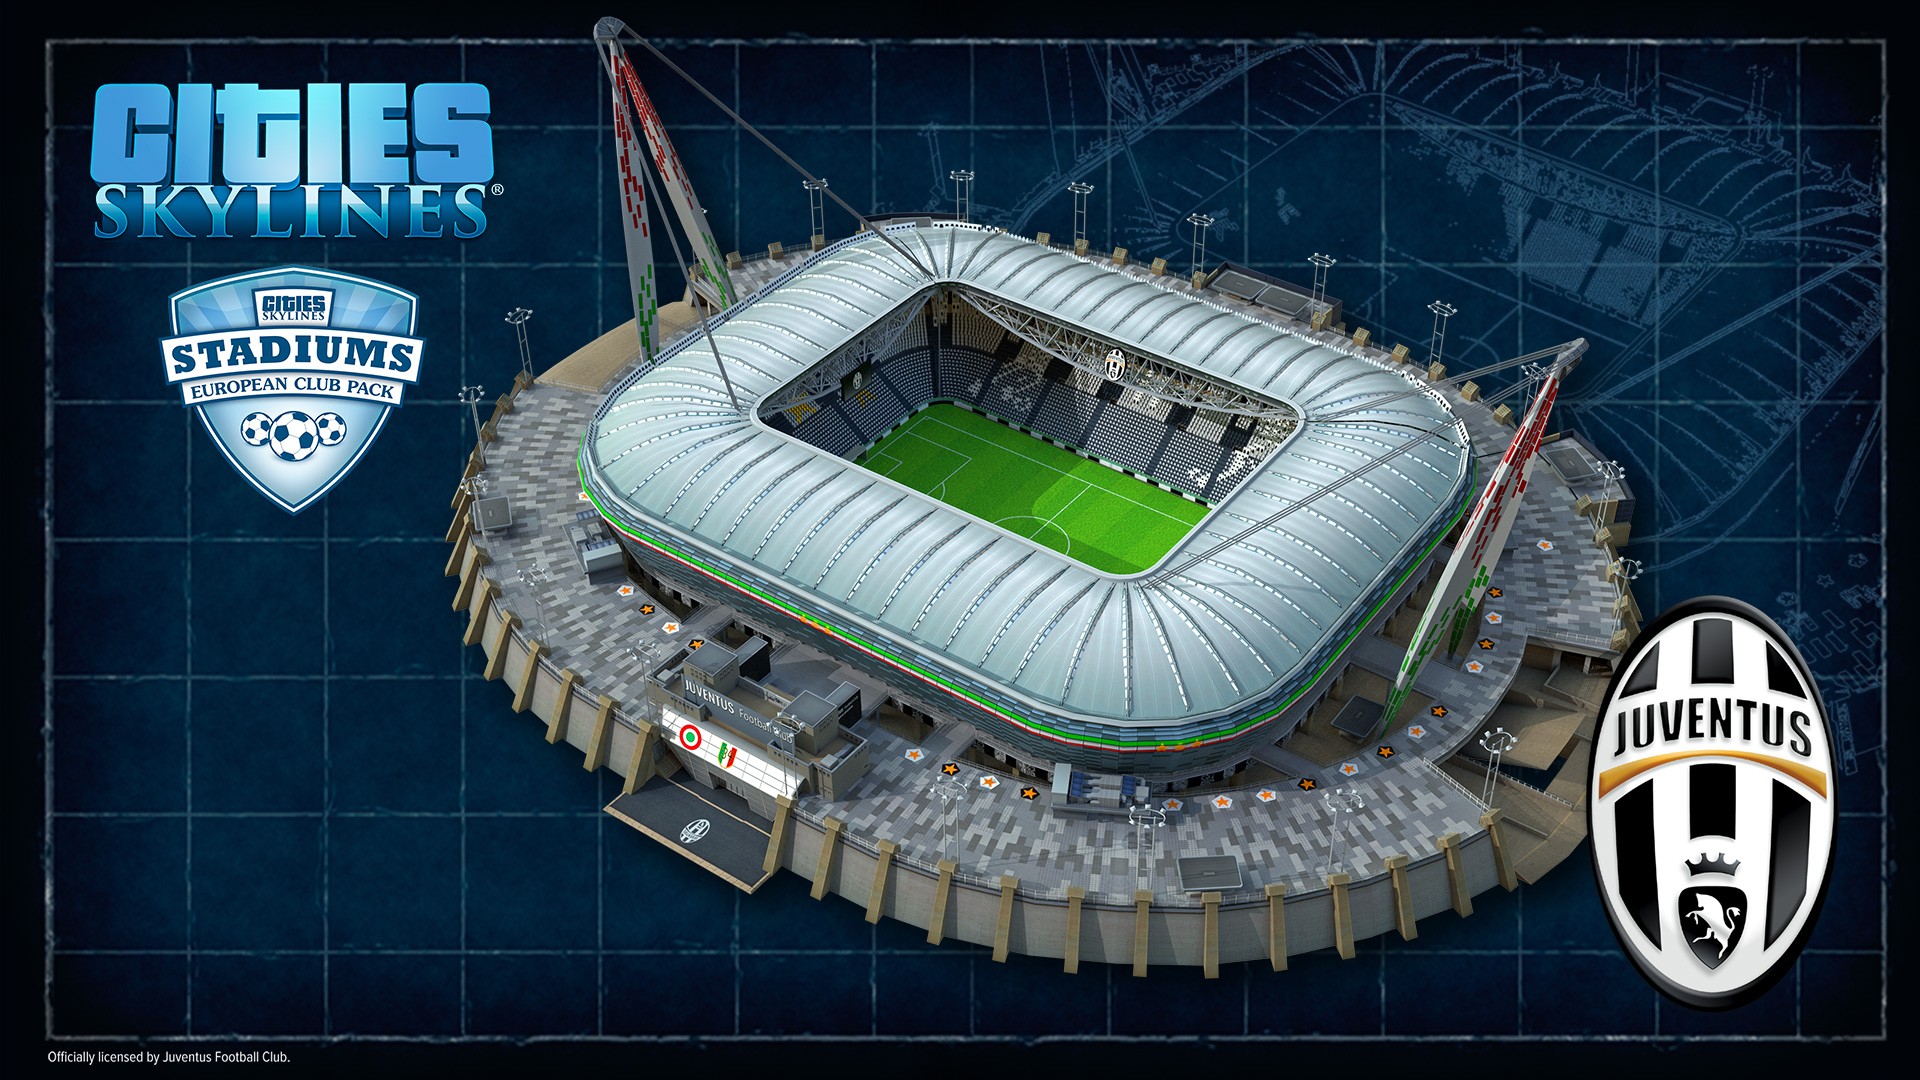 Cities: Skylines Goes Clubbing with Real-World Football Clubs and Stadiums